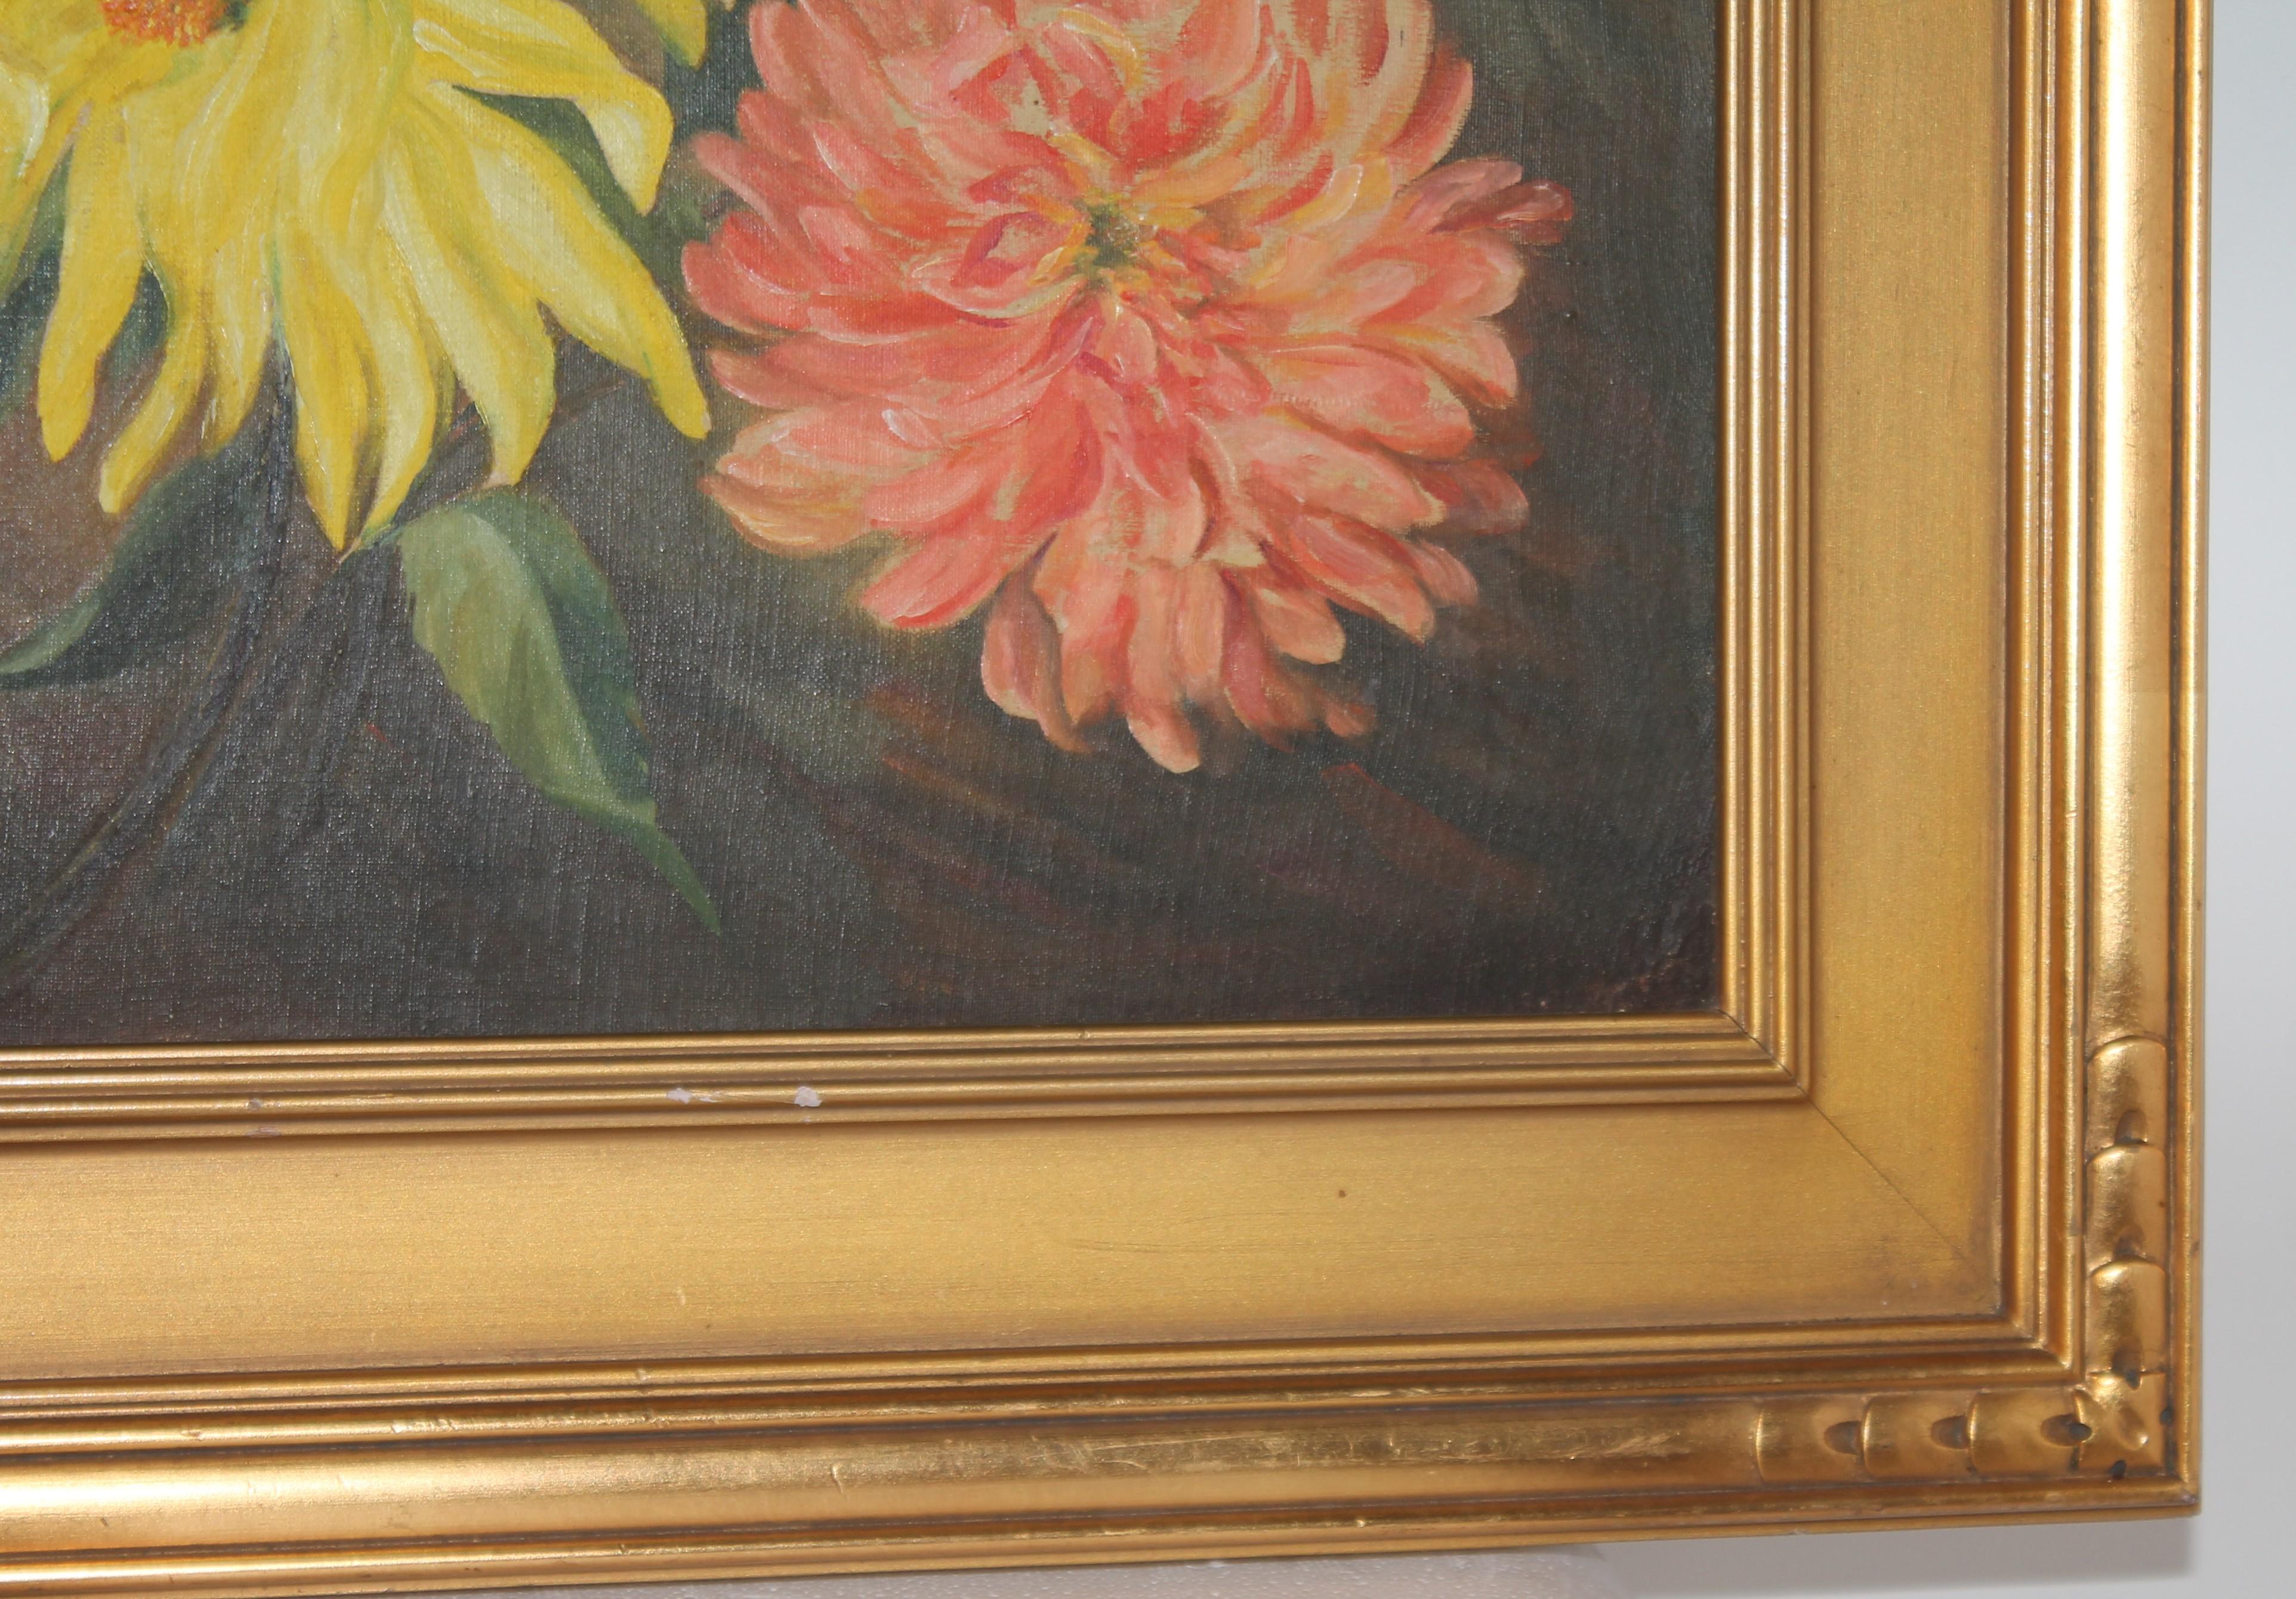 Adirondack Early 20th C Oil Painting Of Chrysanthemums For Sale